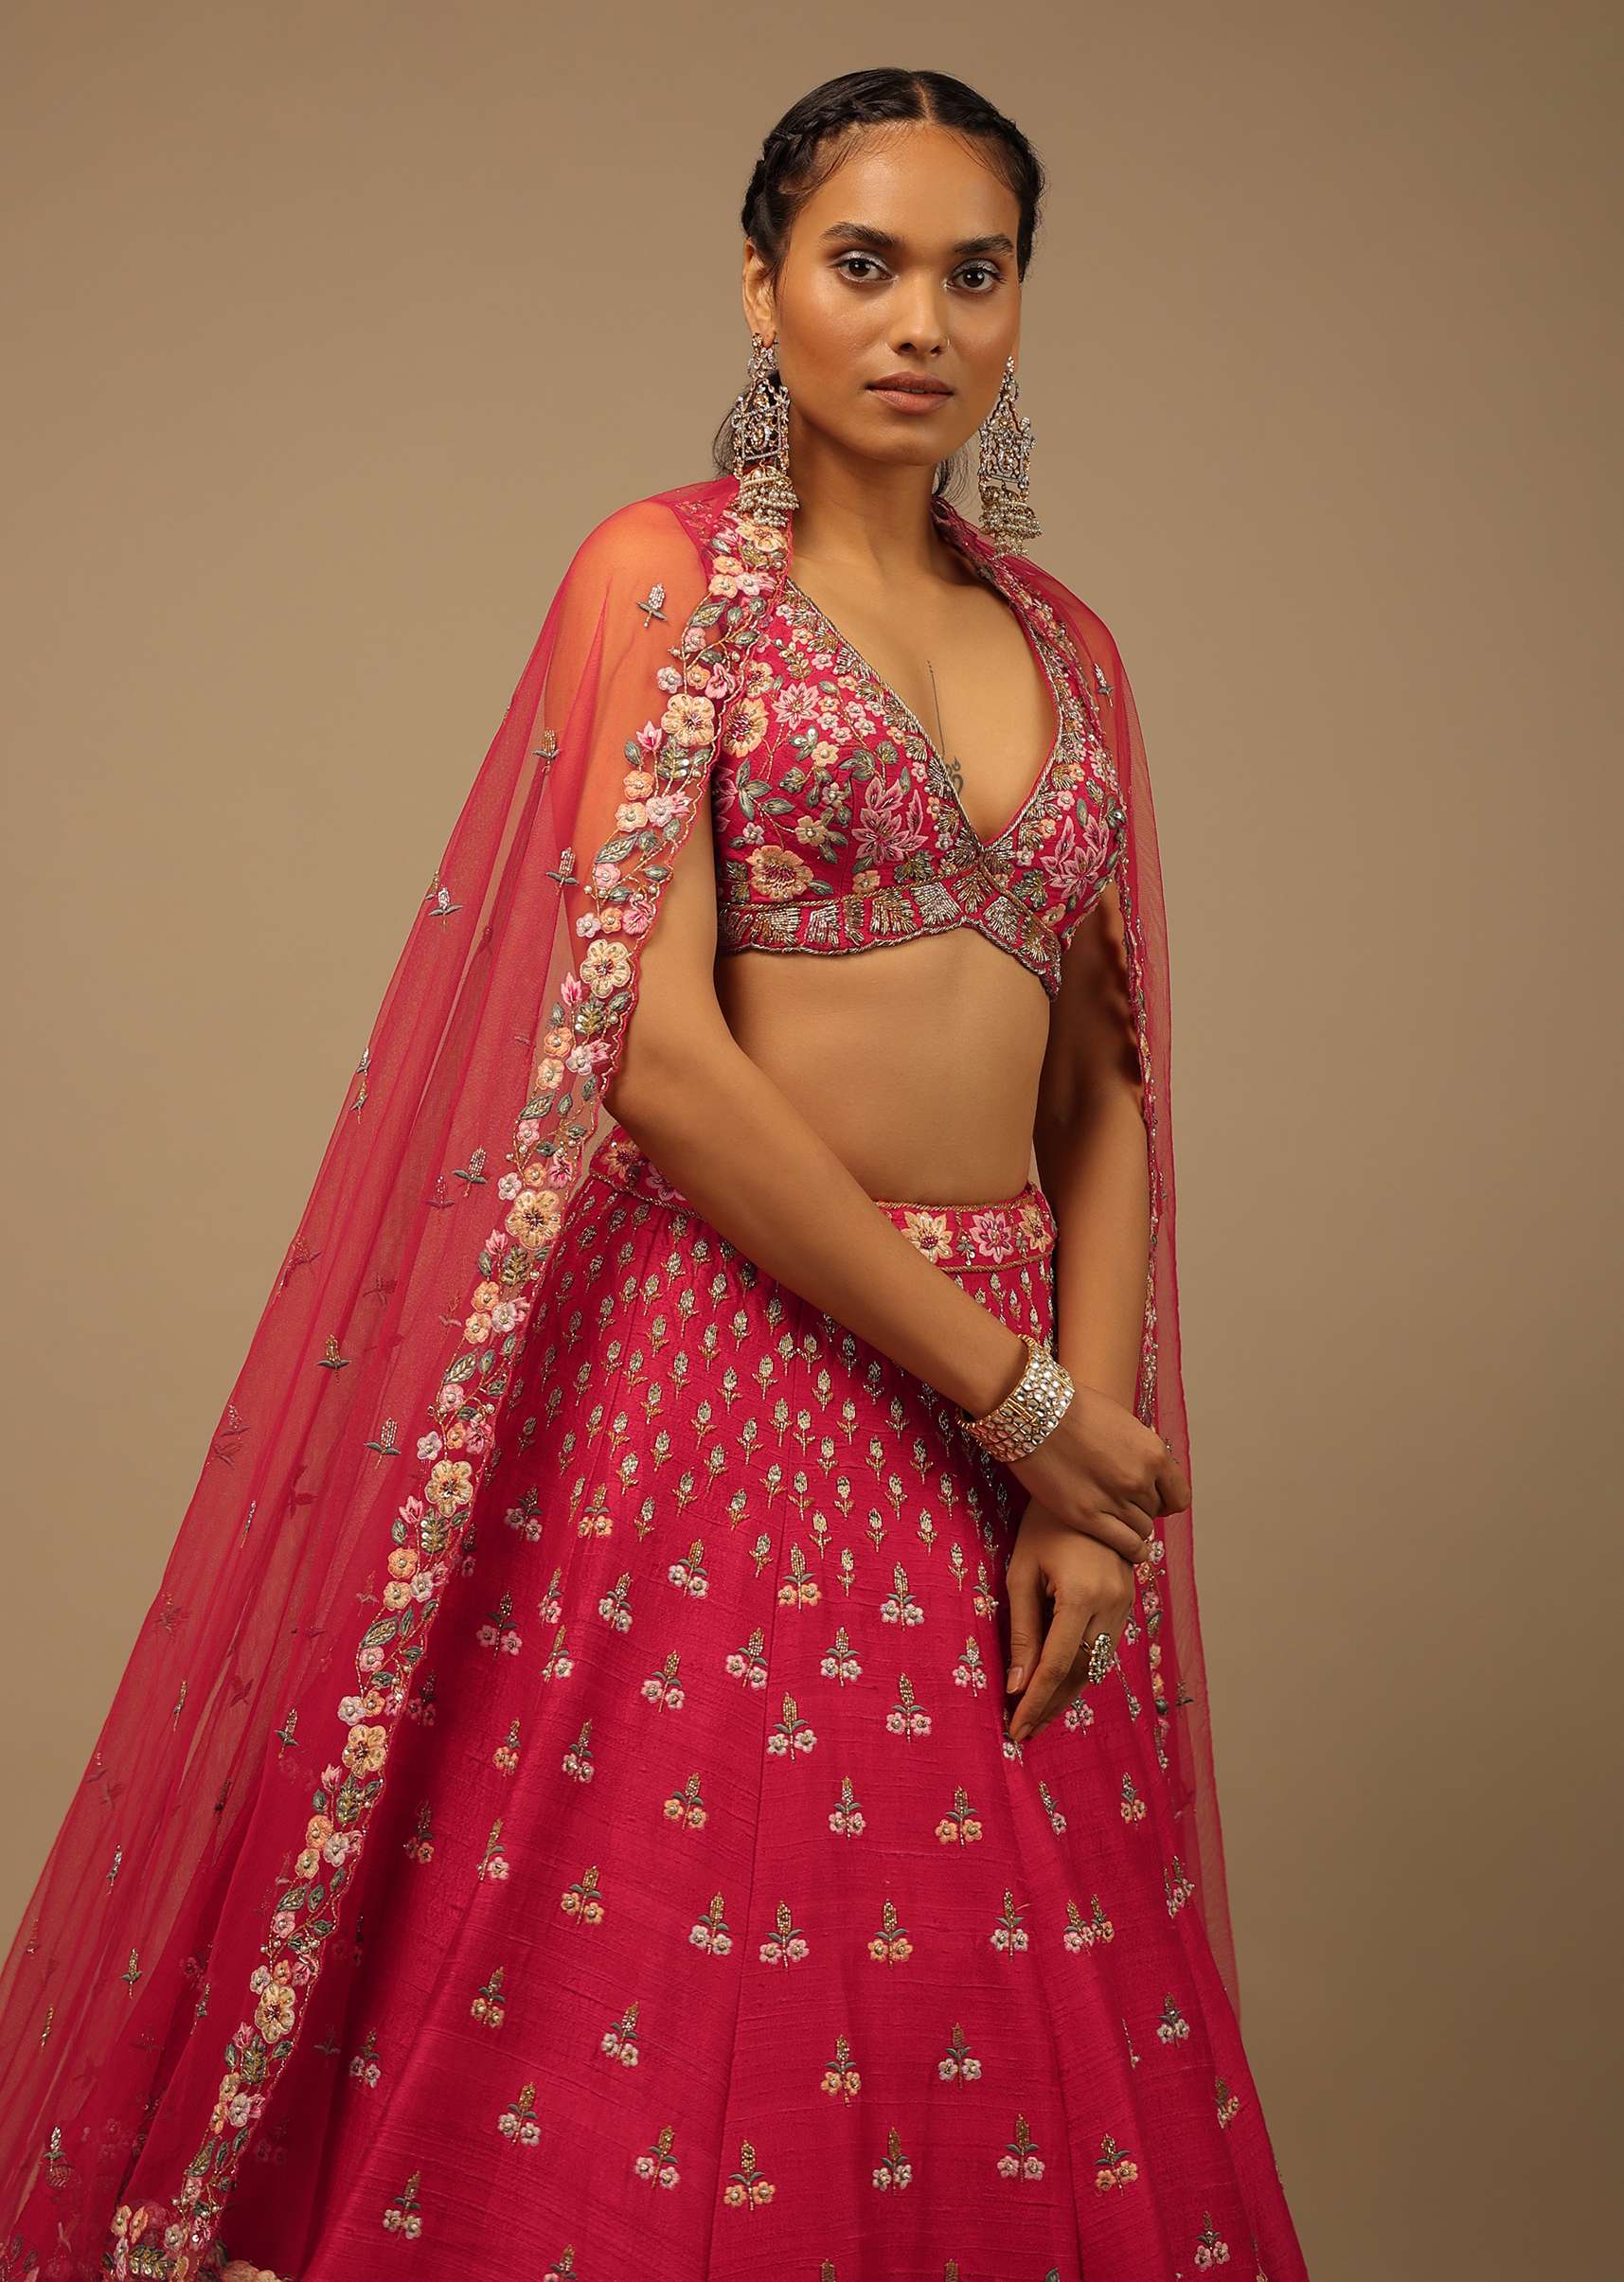 Rani Pink Lehenga Choli In Raw Silk With A Cluster Of Multi Colored Resham Flowers And Cut Dana Highlights